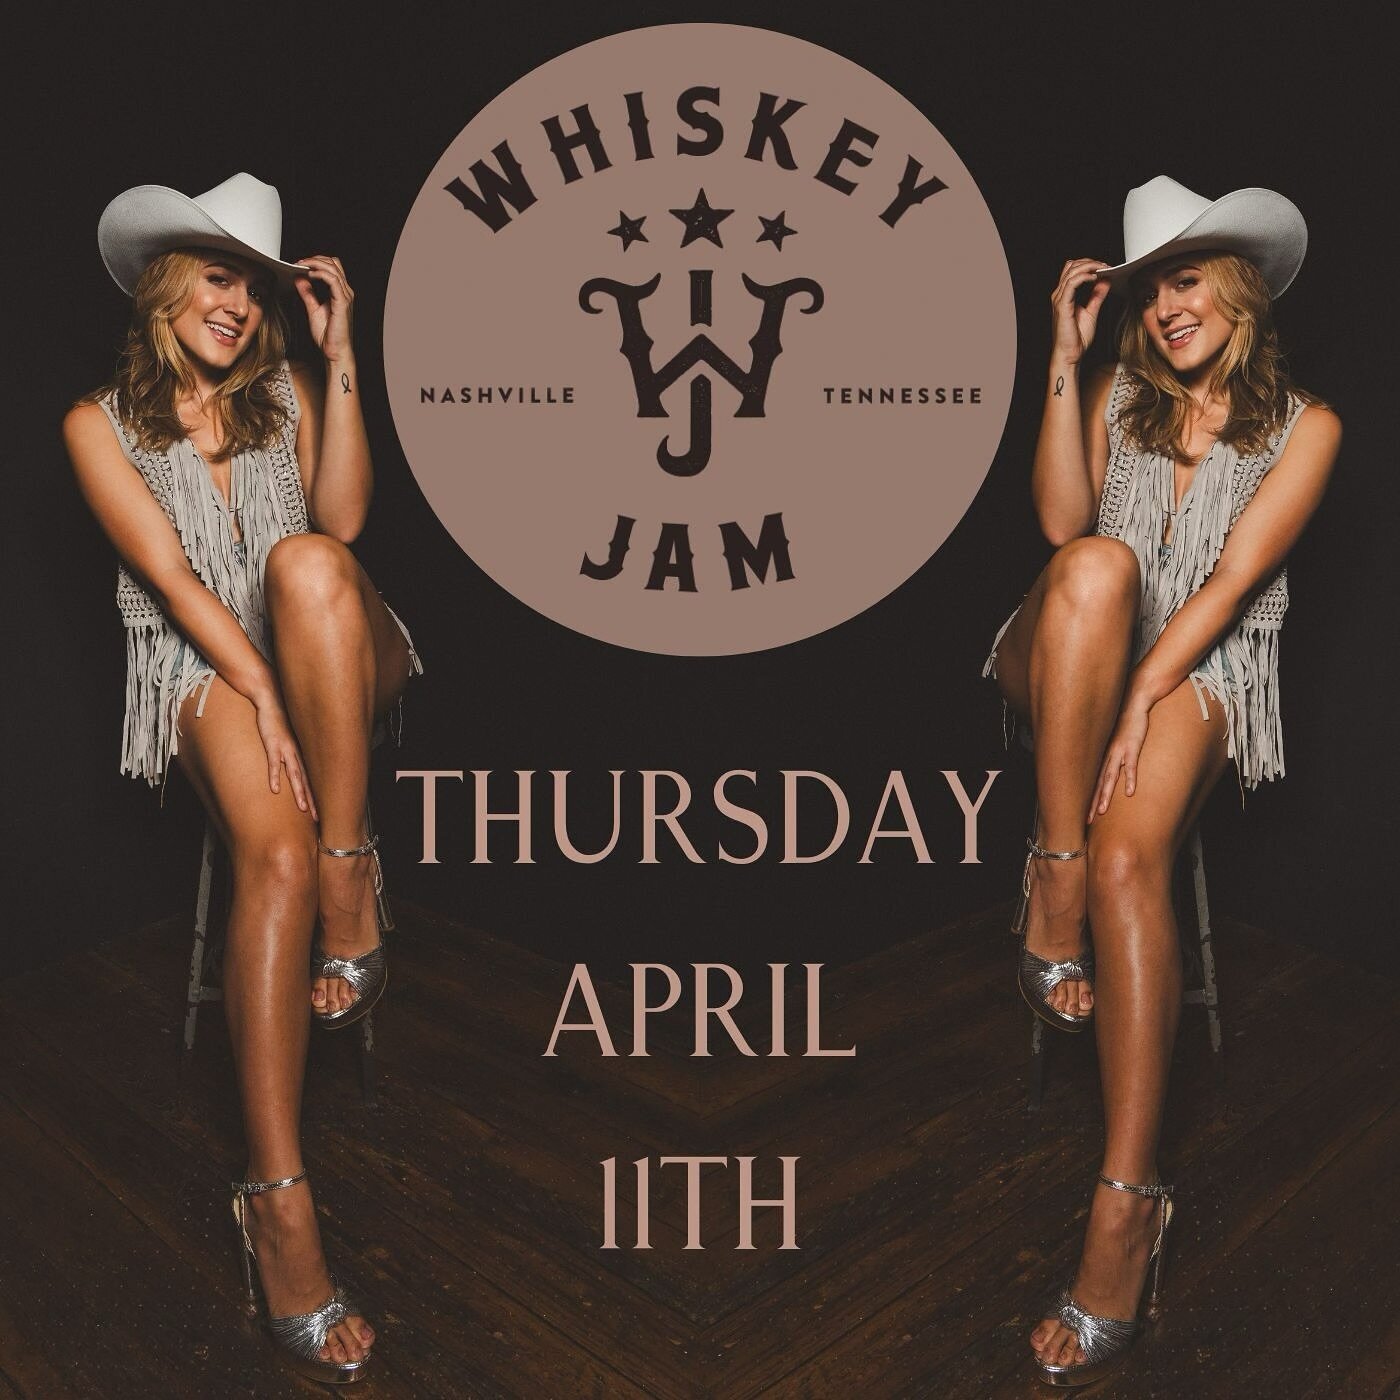 Been a long time @whiskeyjam 😉 #MarkYourCalendars